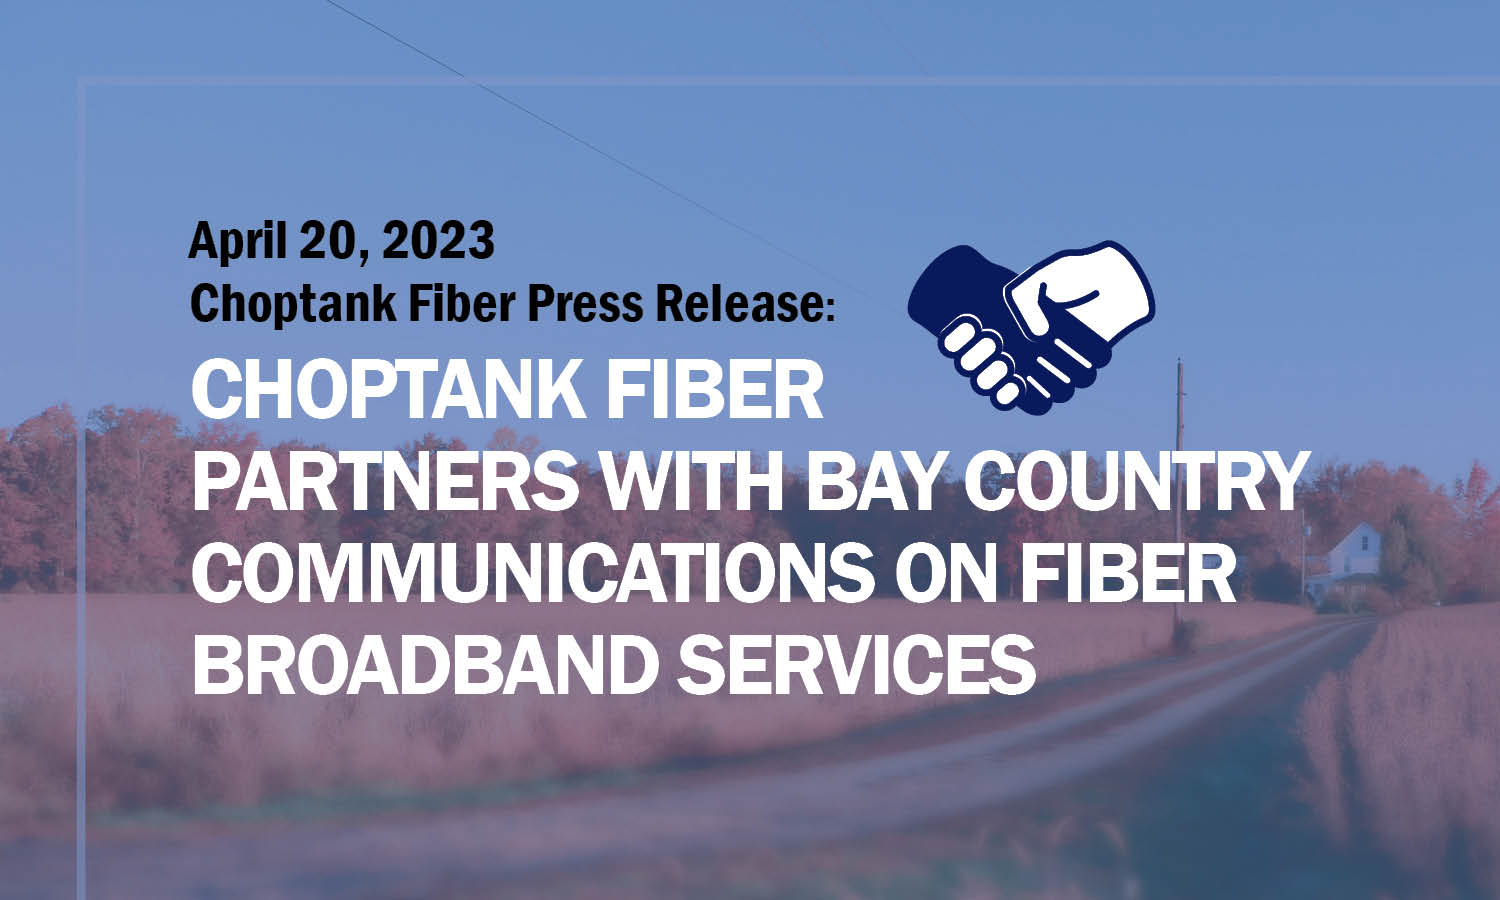 Choptank Fiber Partners with Bay Country Communications on Fiber Broadband Services